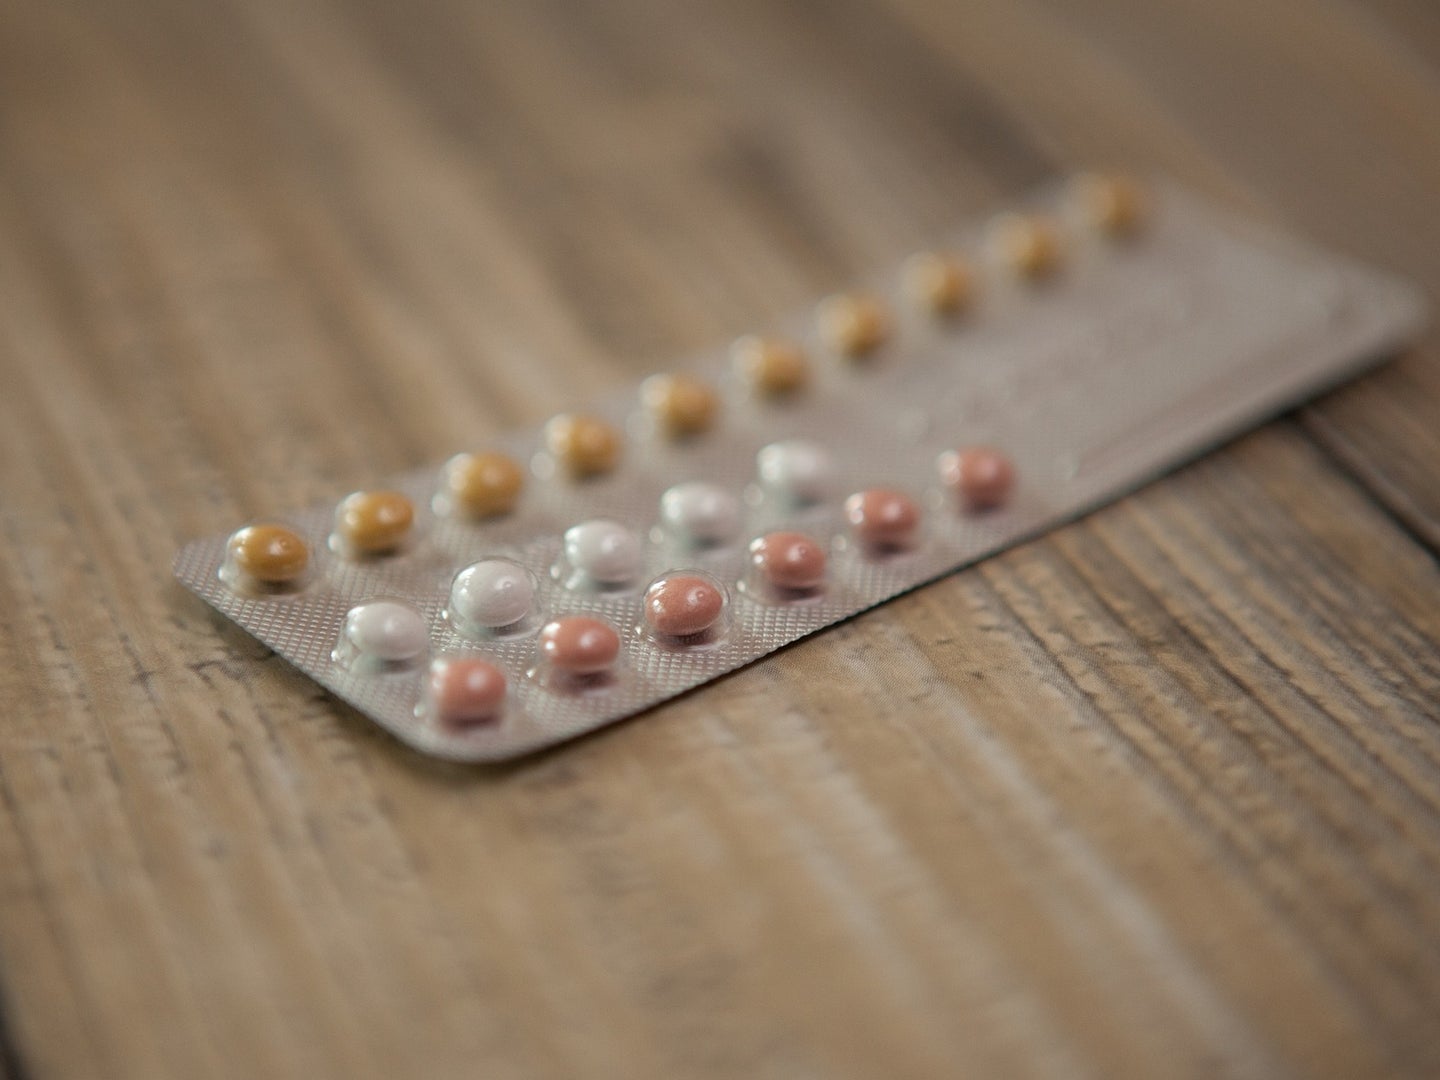 A pack of birth control pills.